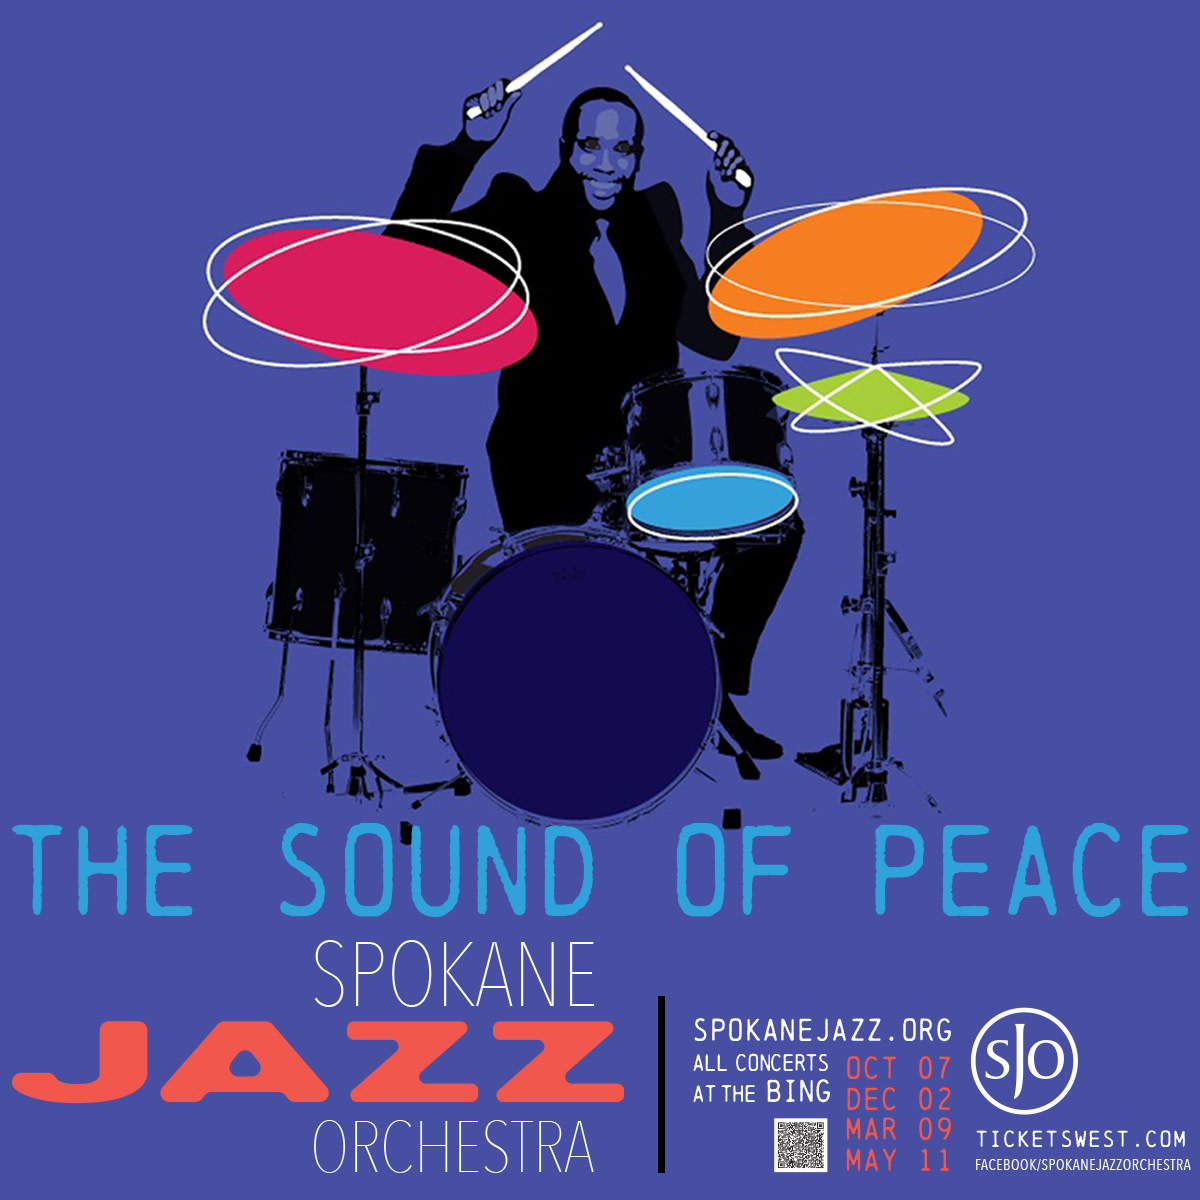 SJO's season finale brings the sounds of a Hammond Organ played by Wayne Horvitz, an award-winning keyboard player and an acclaimed musician and composer who owns and entertains at his own jazz club in Seattle.

#downtownspokane #spokanesmallbusiness #spokanewa #spokanedoesntsuck